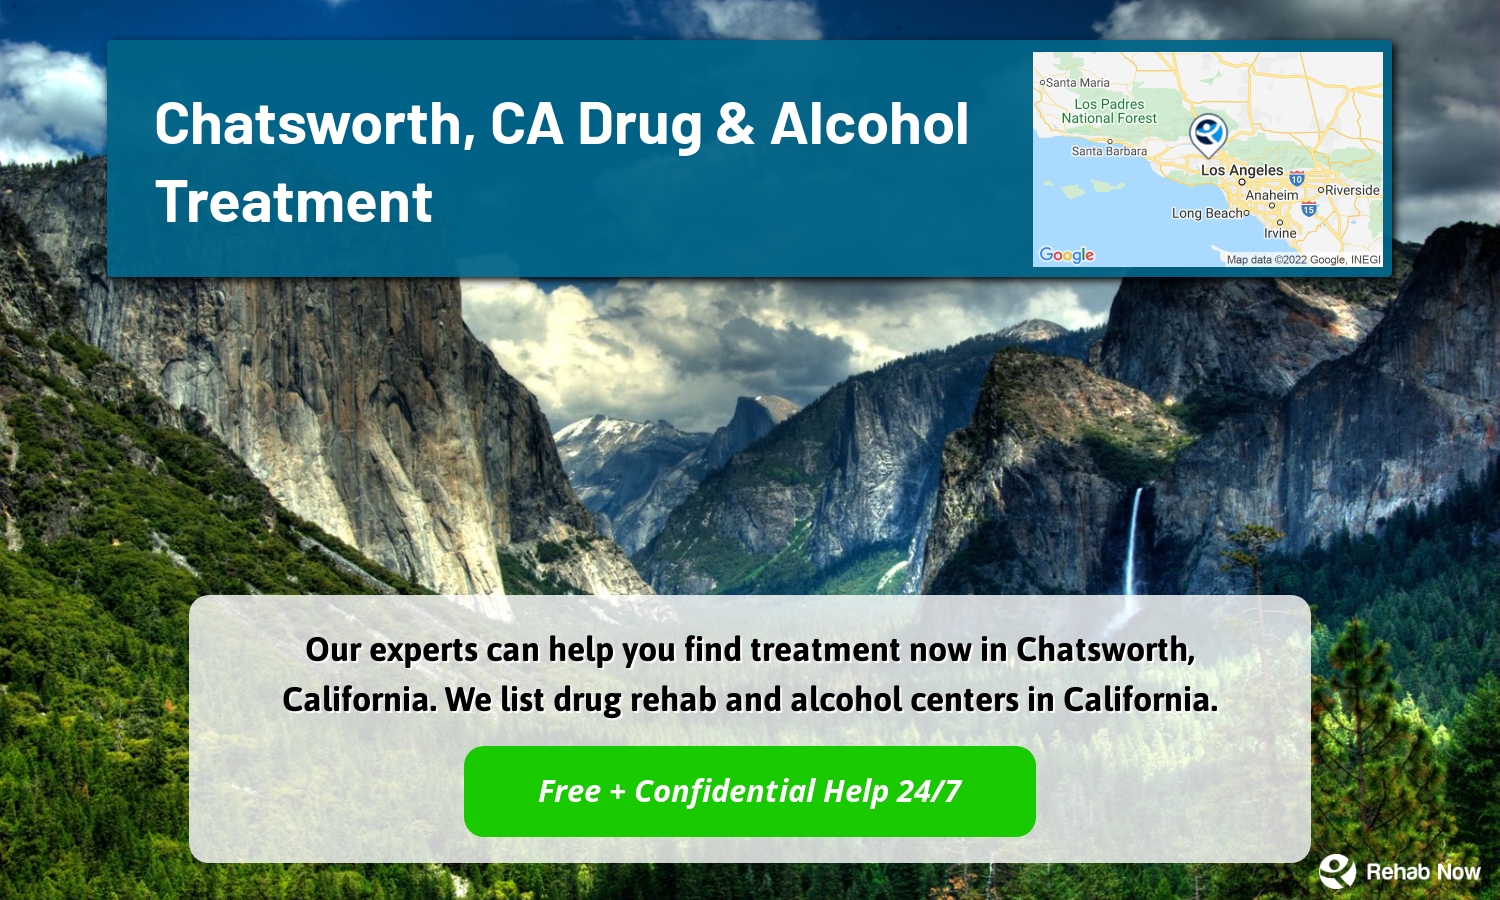 Our experts can help you find treatment now in Chatsworth, California. We list drug rehab and alcohol centers in California.